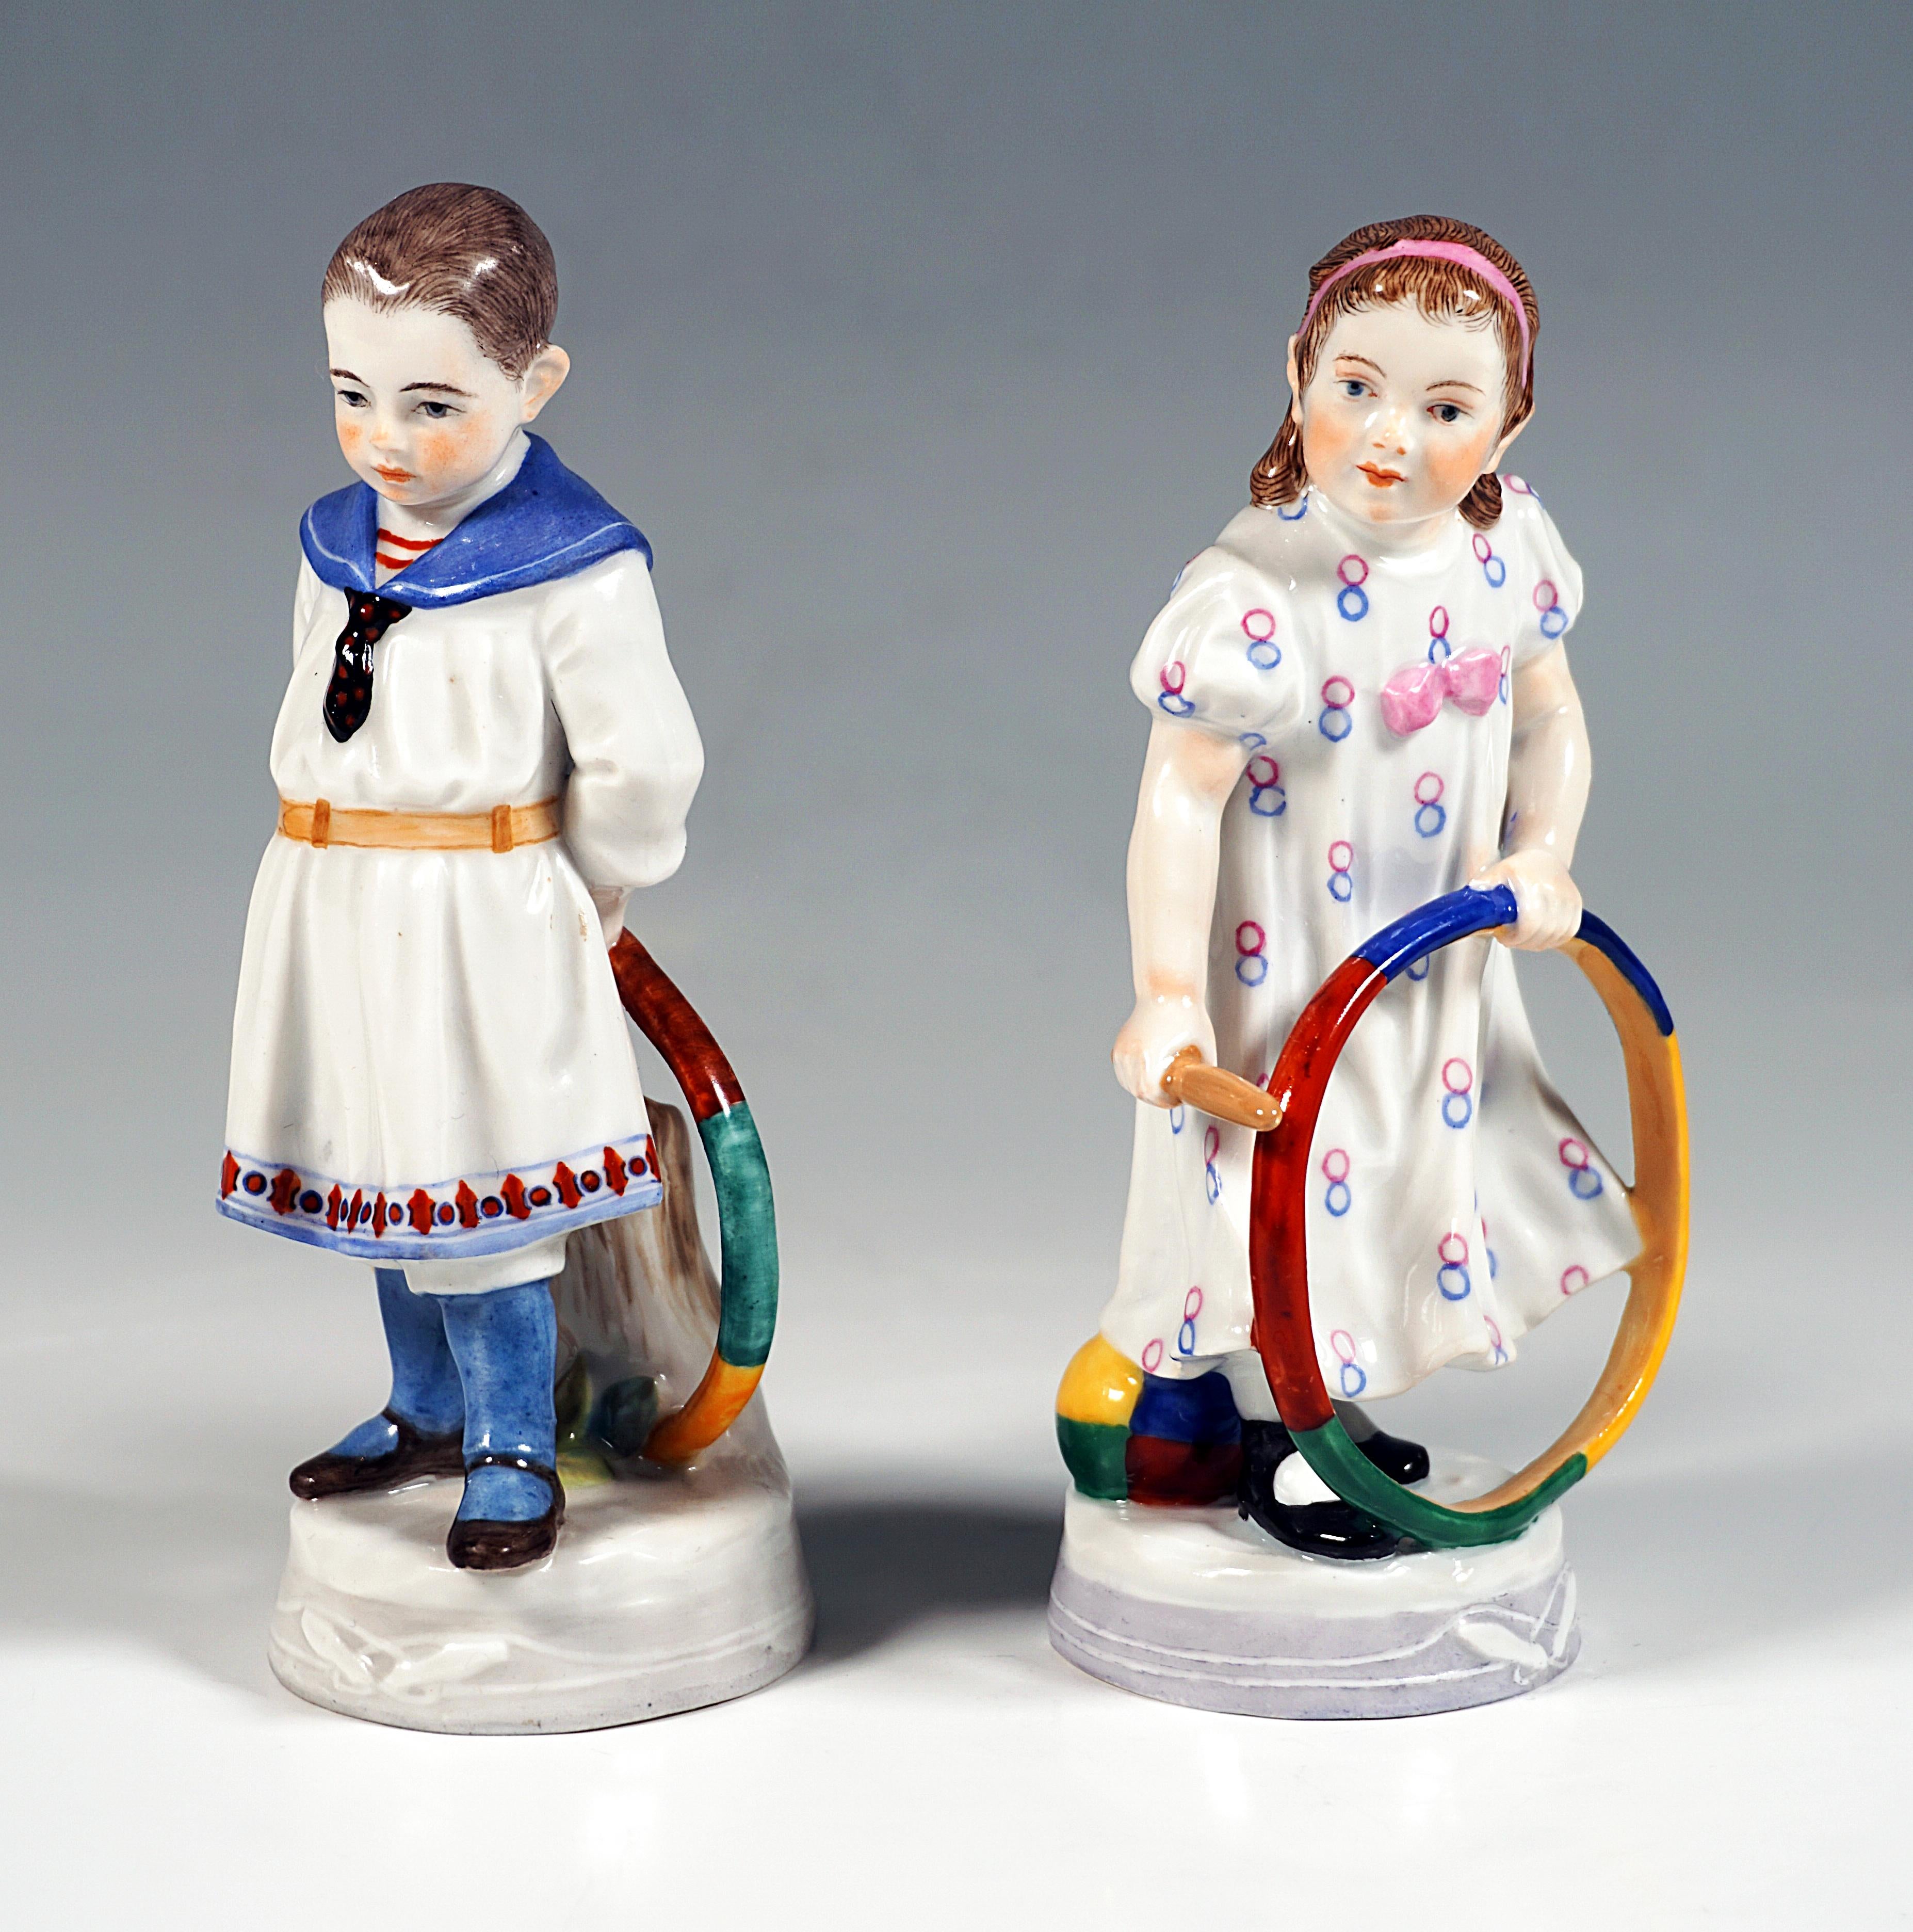 Very rare Meissen Art Nouveau porcelain figurines:
Two children with colorful hoops:
Standing boy in sailor dress, holding the hoop with both hands behind him standing on the ground, supported from behind by a tree trunk, the girl in a dress with a